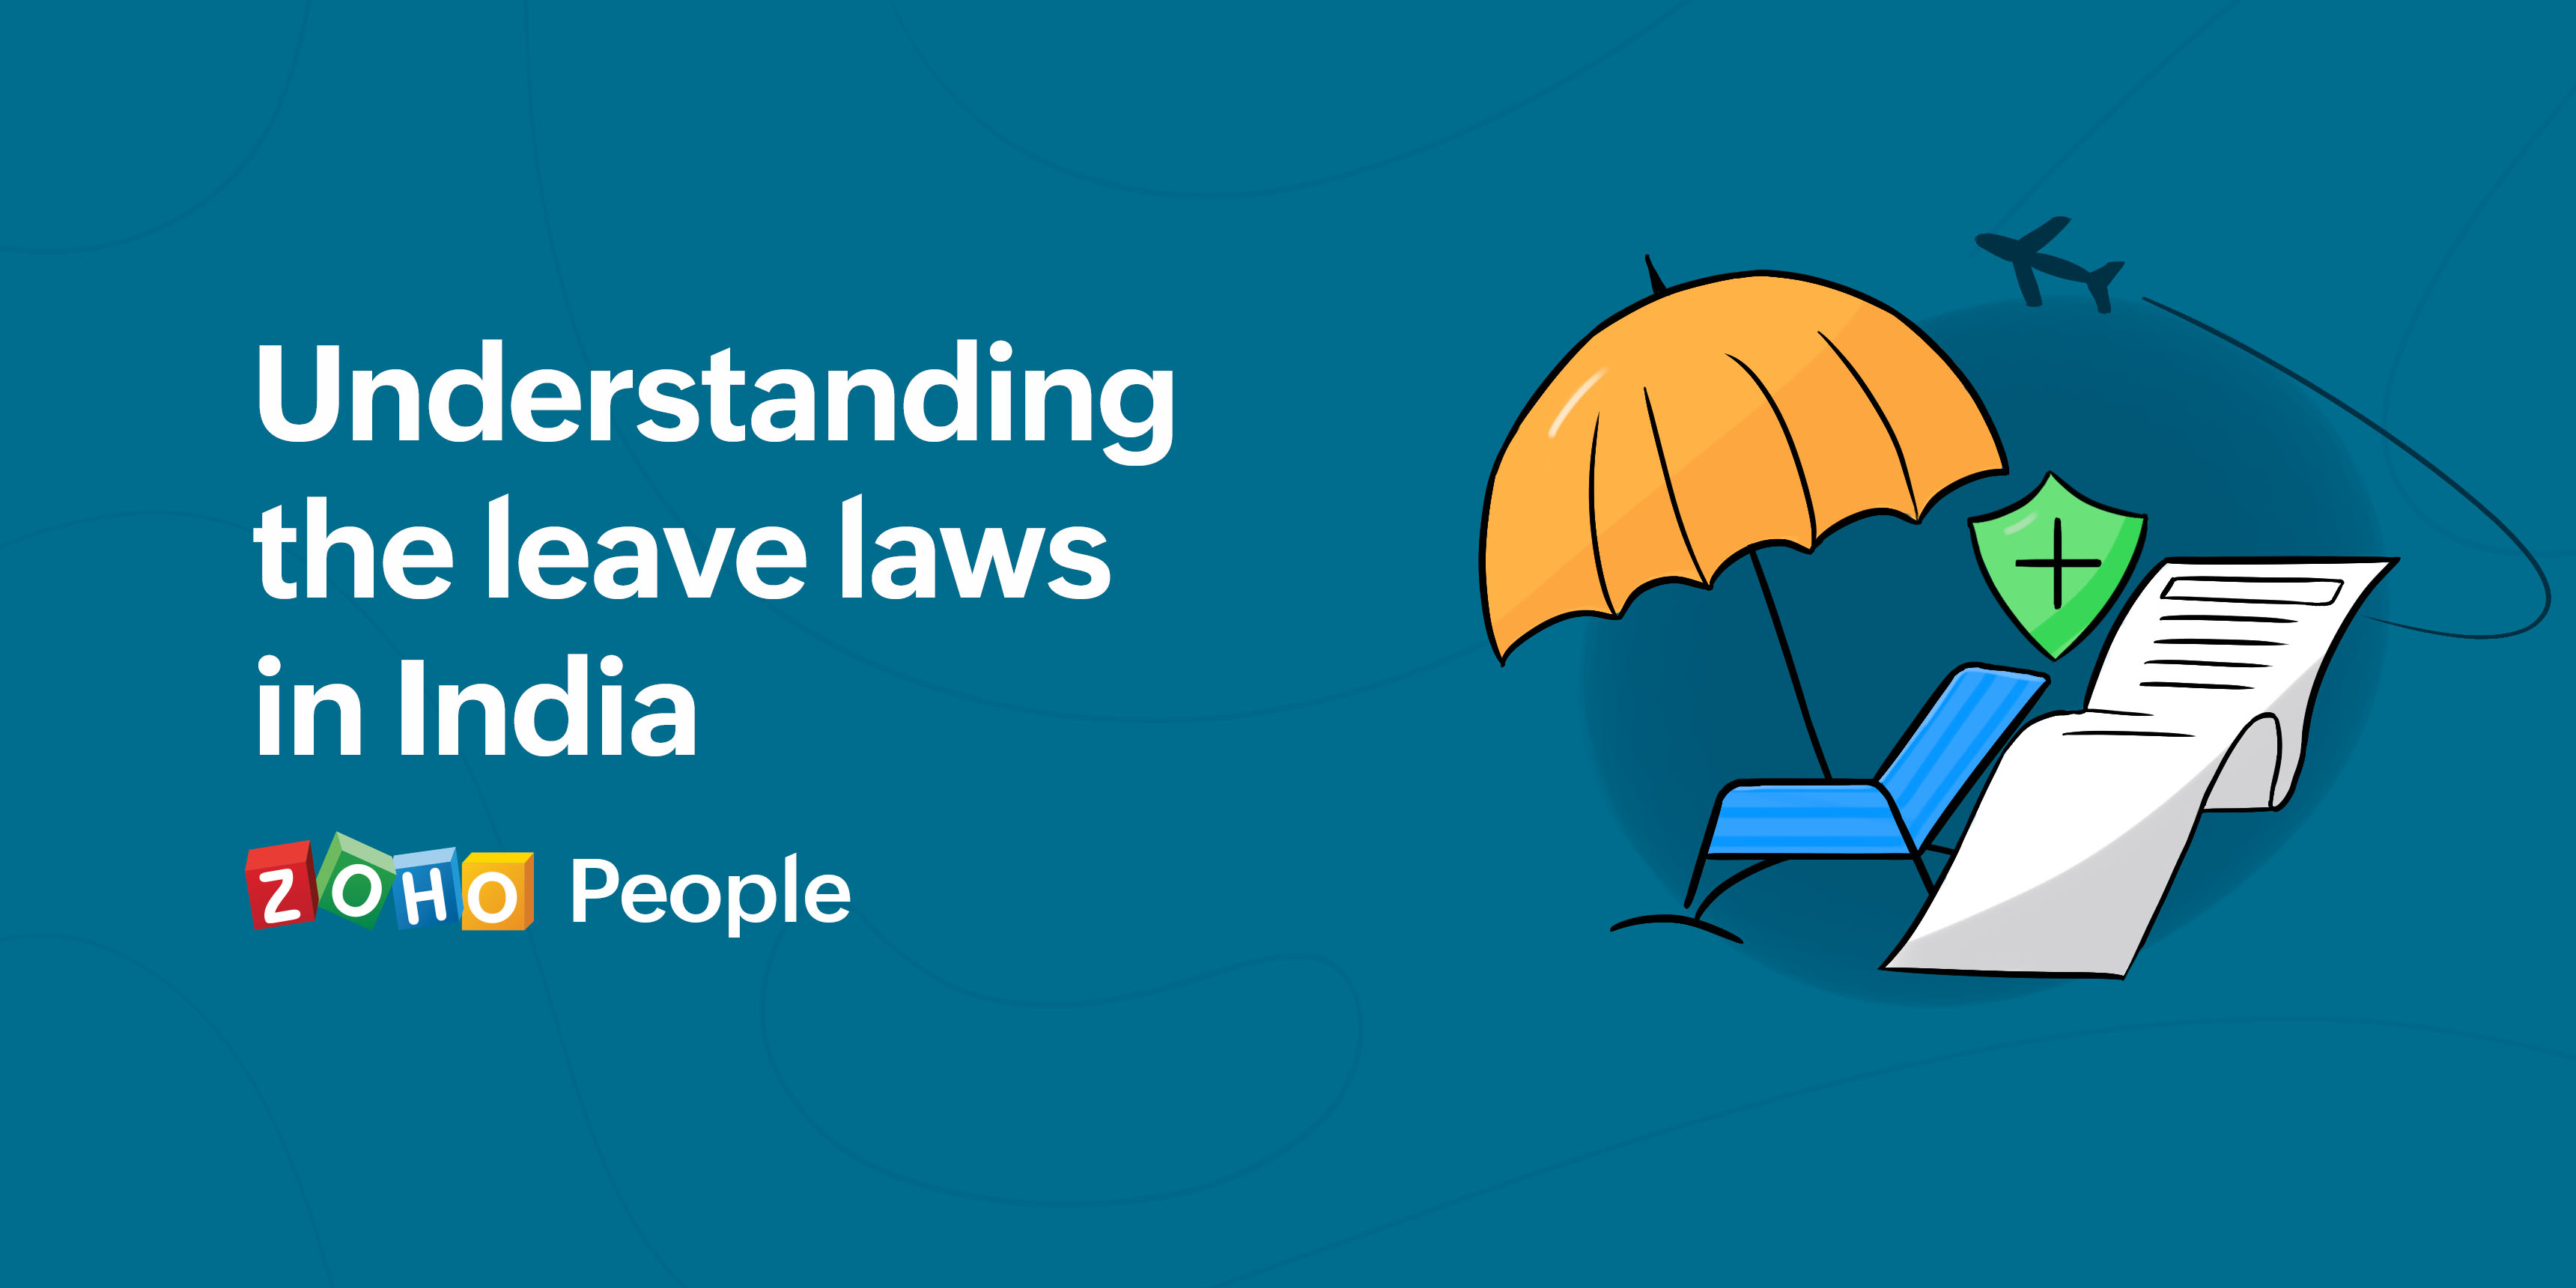 Understanding the leave laws in India